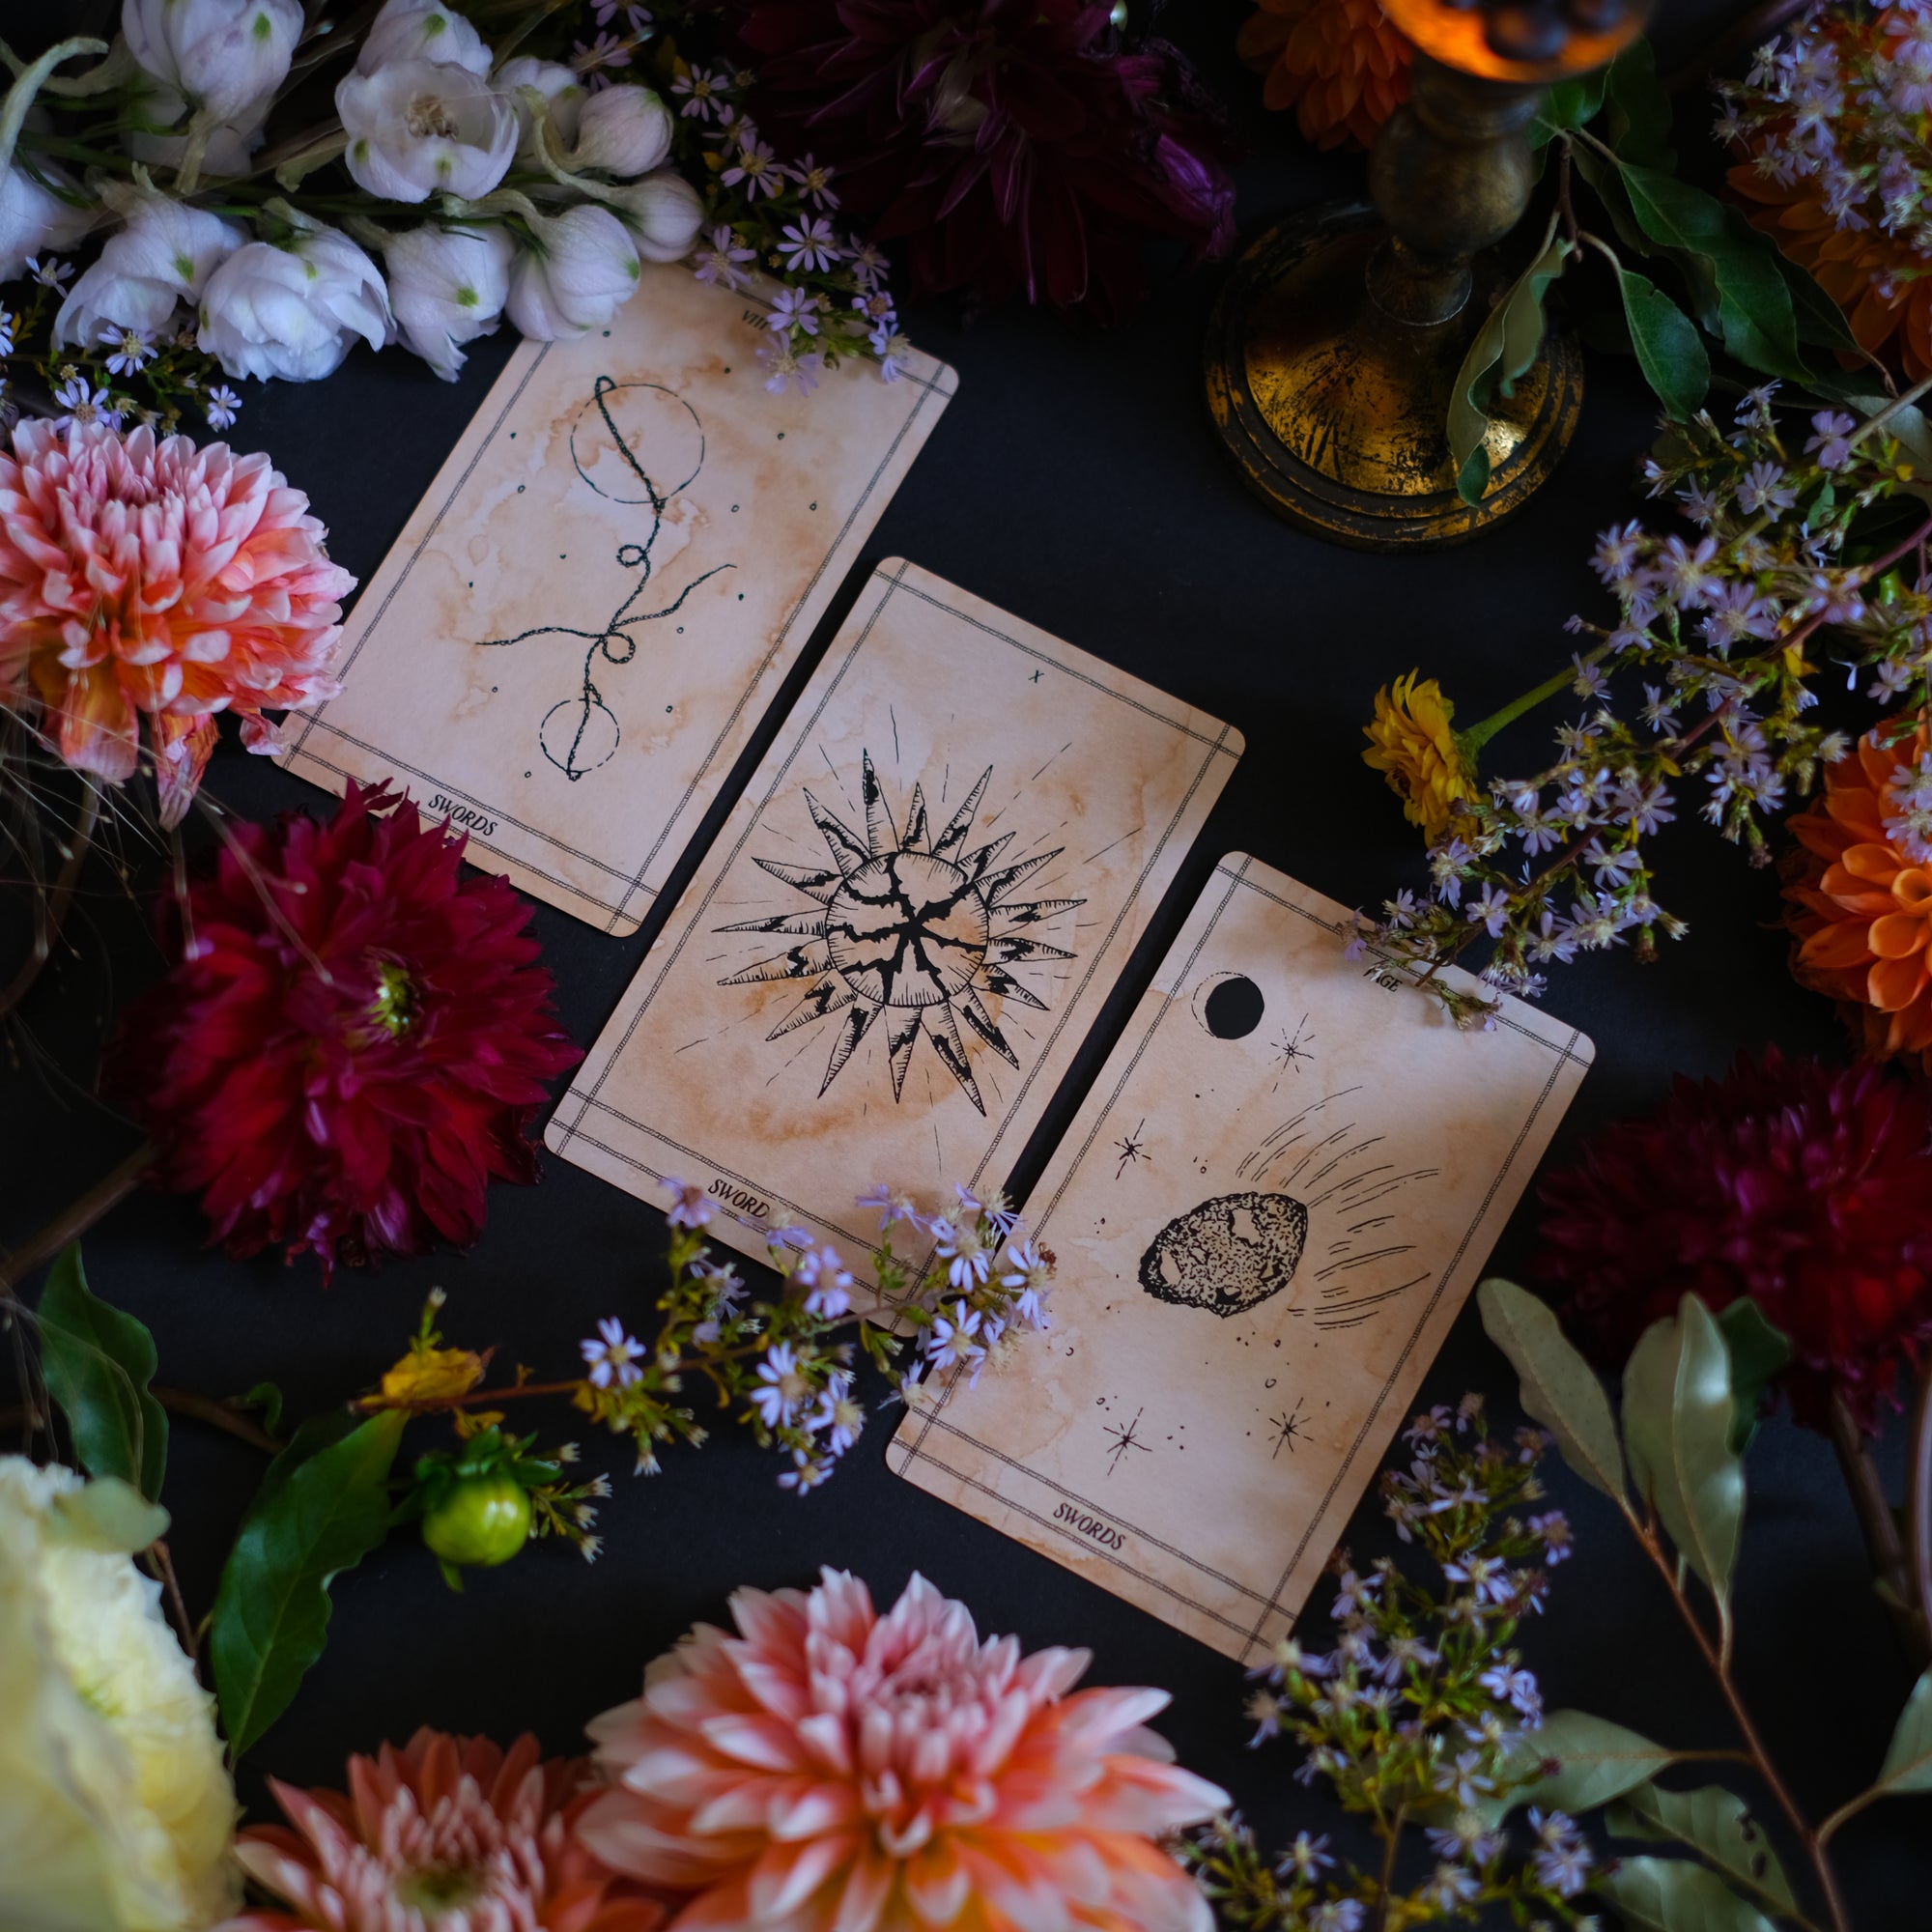 Ad Orbita Tarot is a hand-illustrated 78 card botanical and astrological deck. Rooted in the relationship between plants and the planets, each of these 78 tarot cards draws upon ancient meaning in a modern, imaginative and intuitive form.